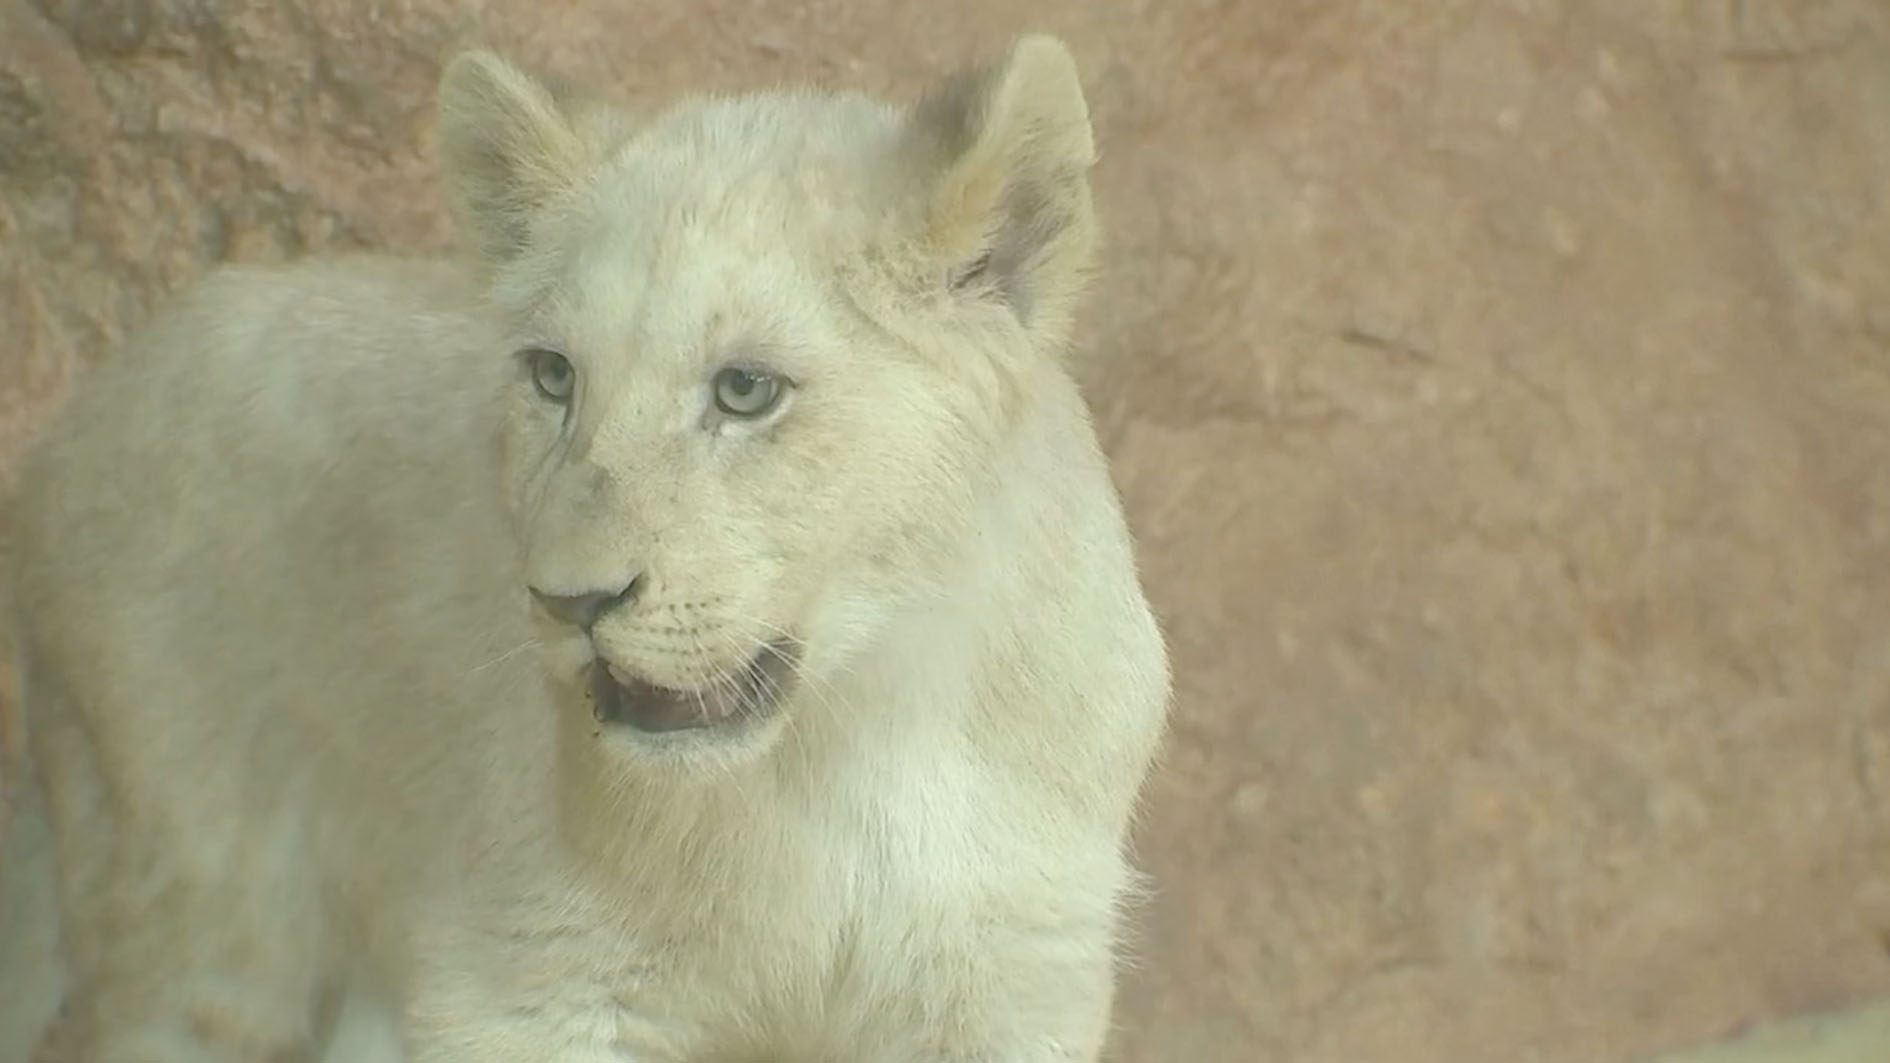 The “Albino” in lions: Why white lions are white - CGTN